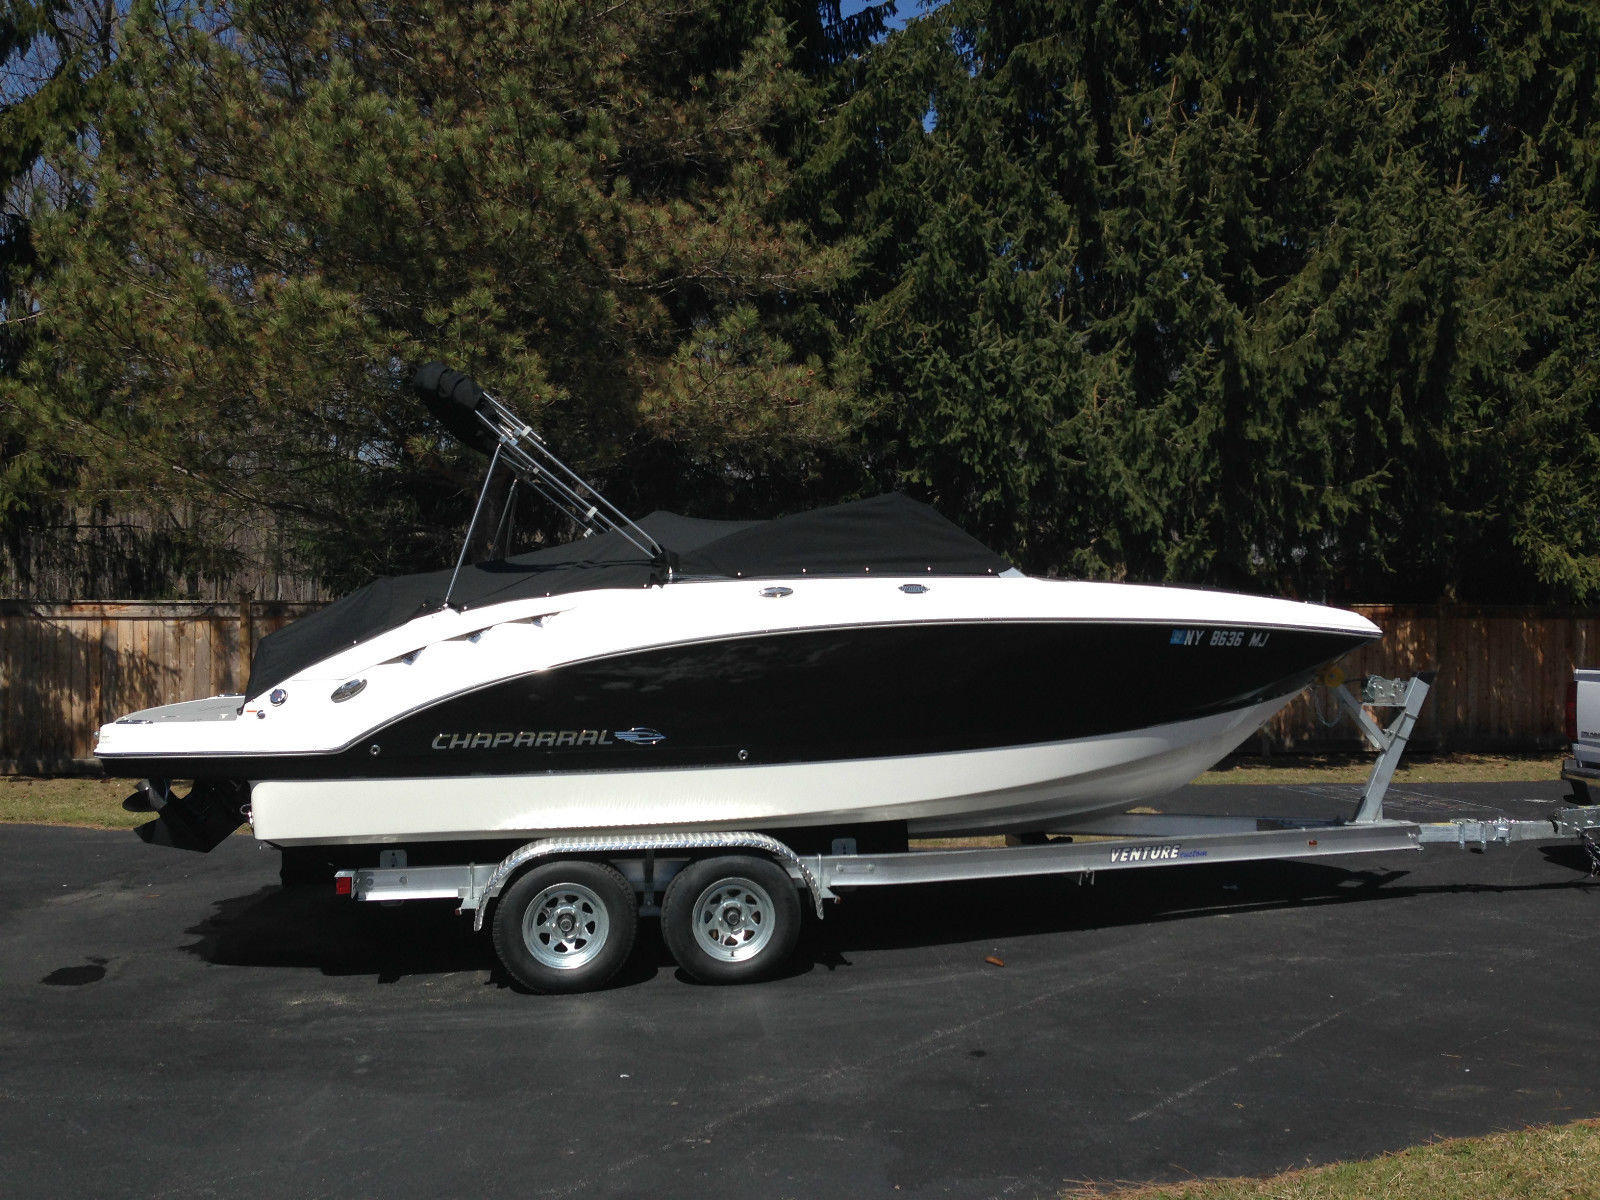 Chaparral Sunesta 224 Only 11 Hours-new Trailer And Loaded With Options